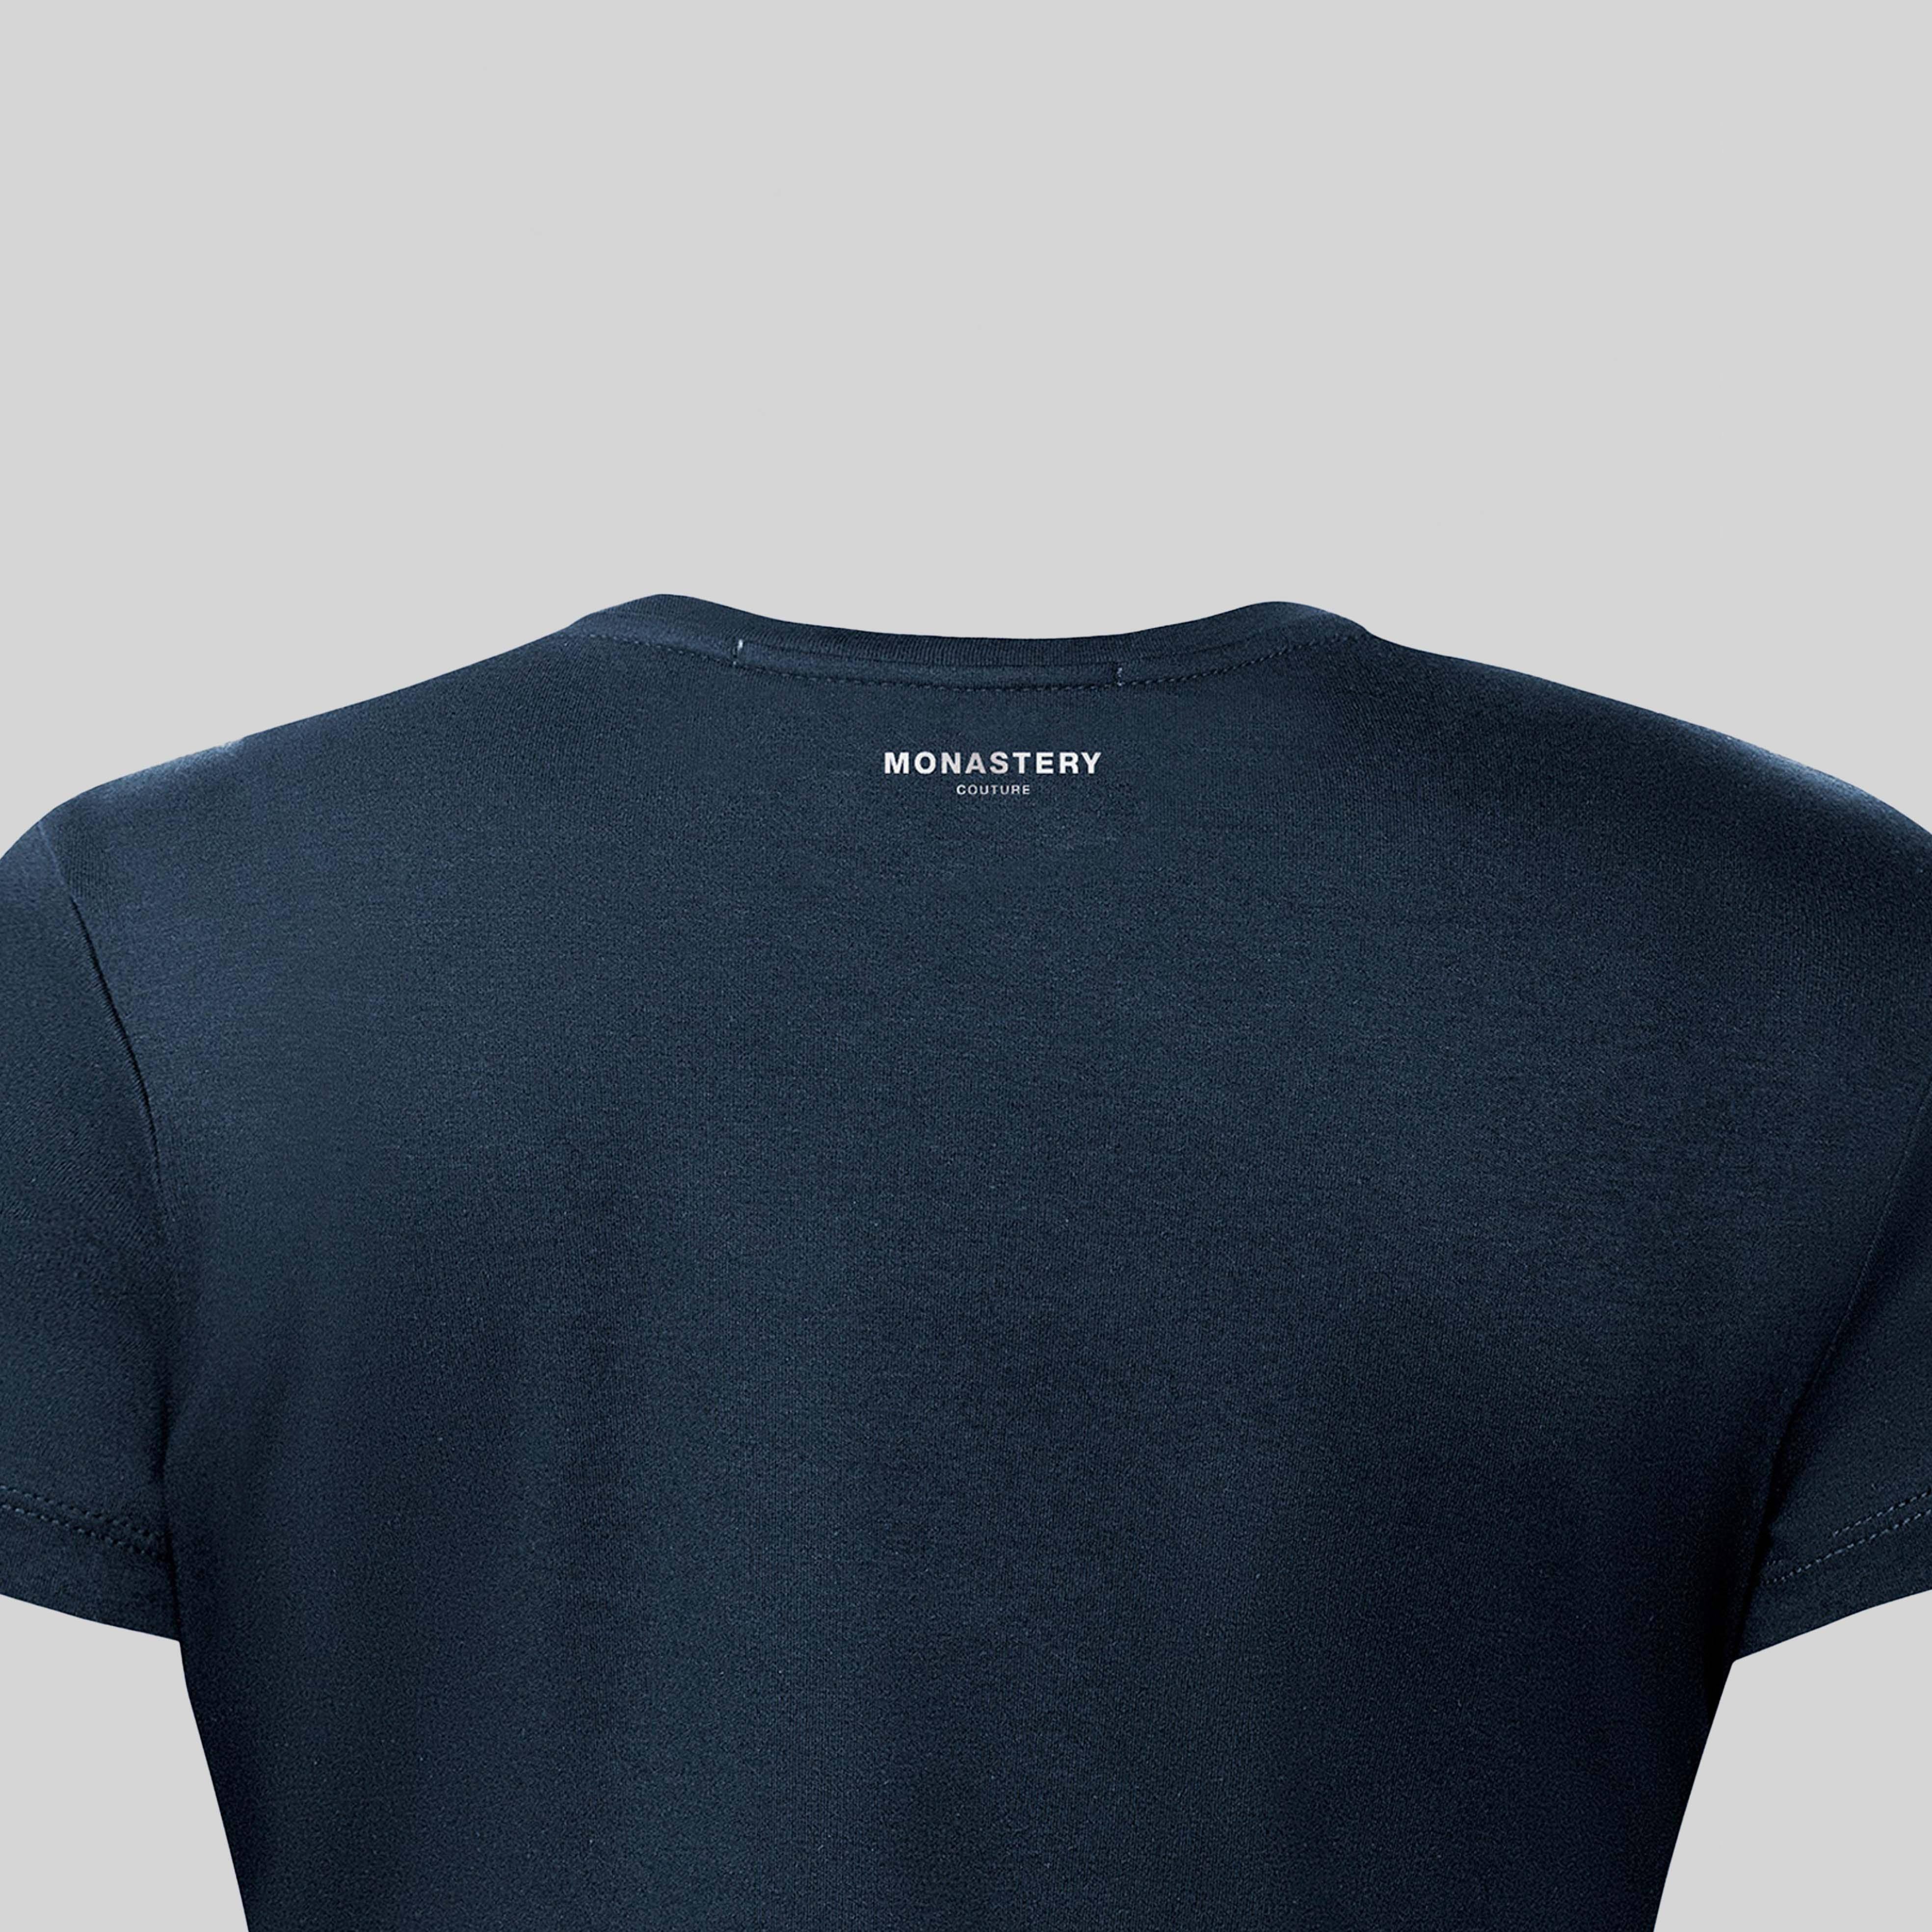 GINETTE T SHIRT NAVY BLUE | Monastery Couture